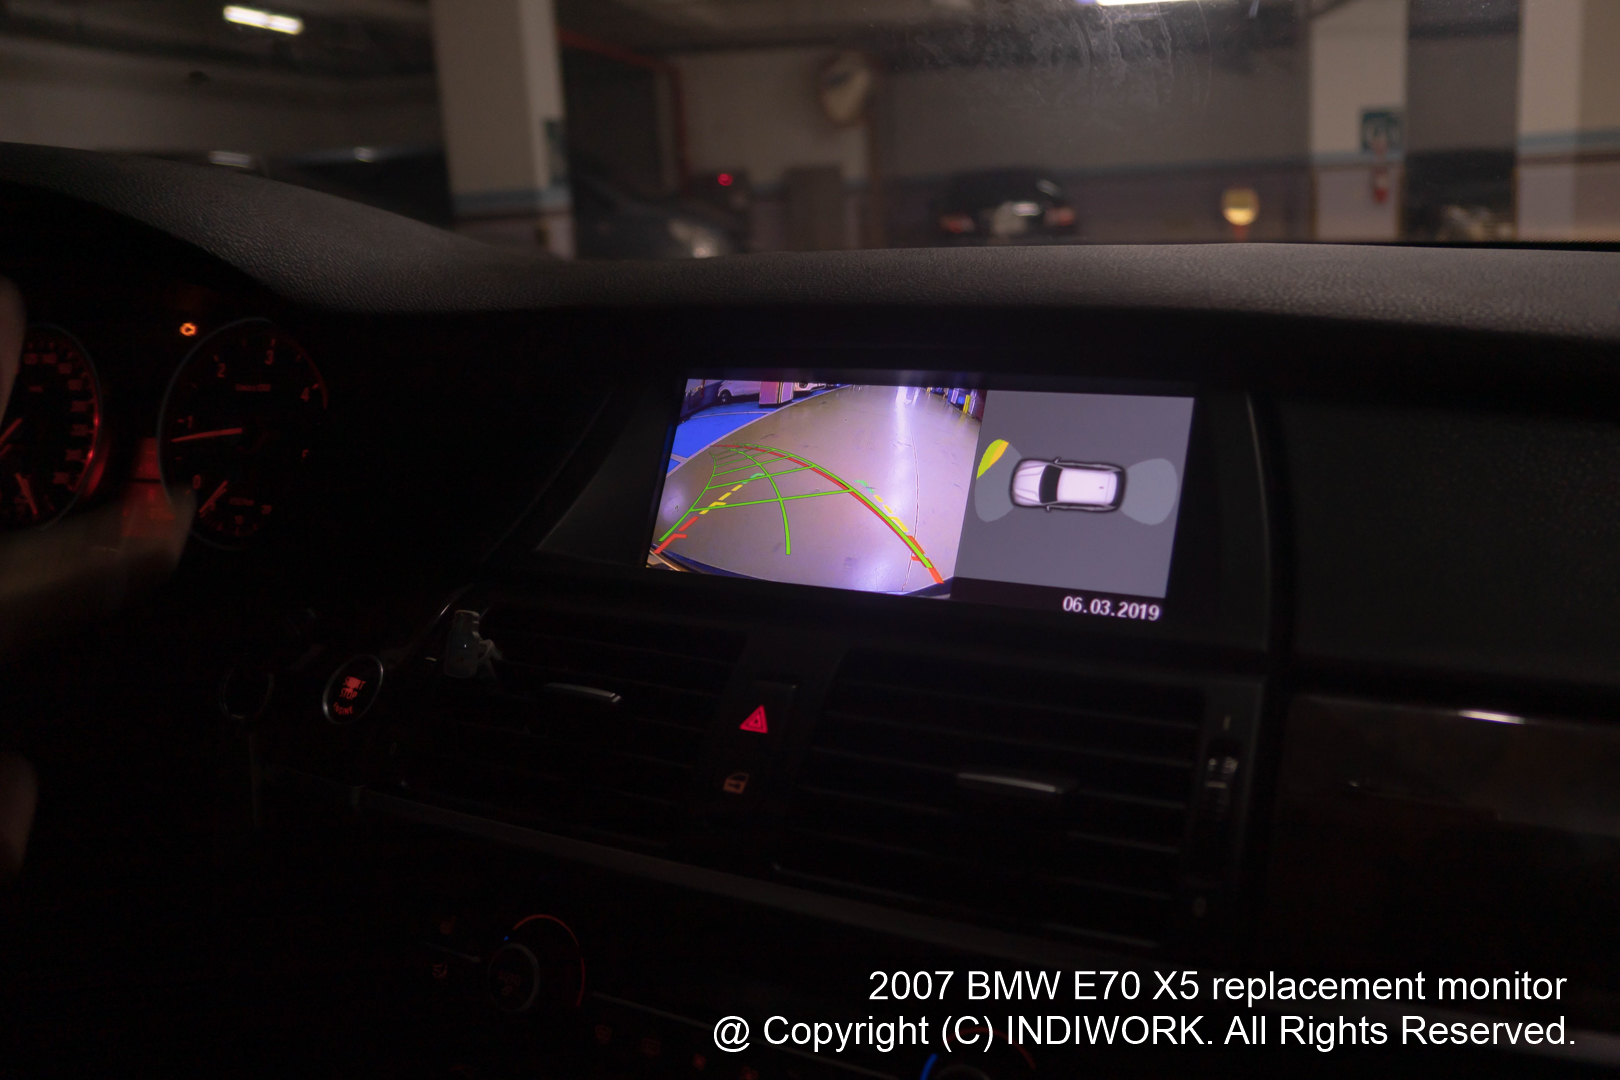 2007 BMW E70 X5 replacement monitor "N-LINK II V4"